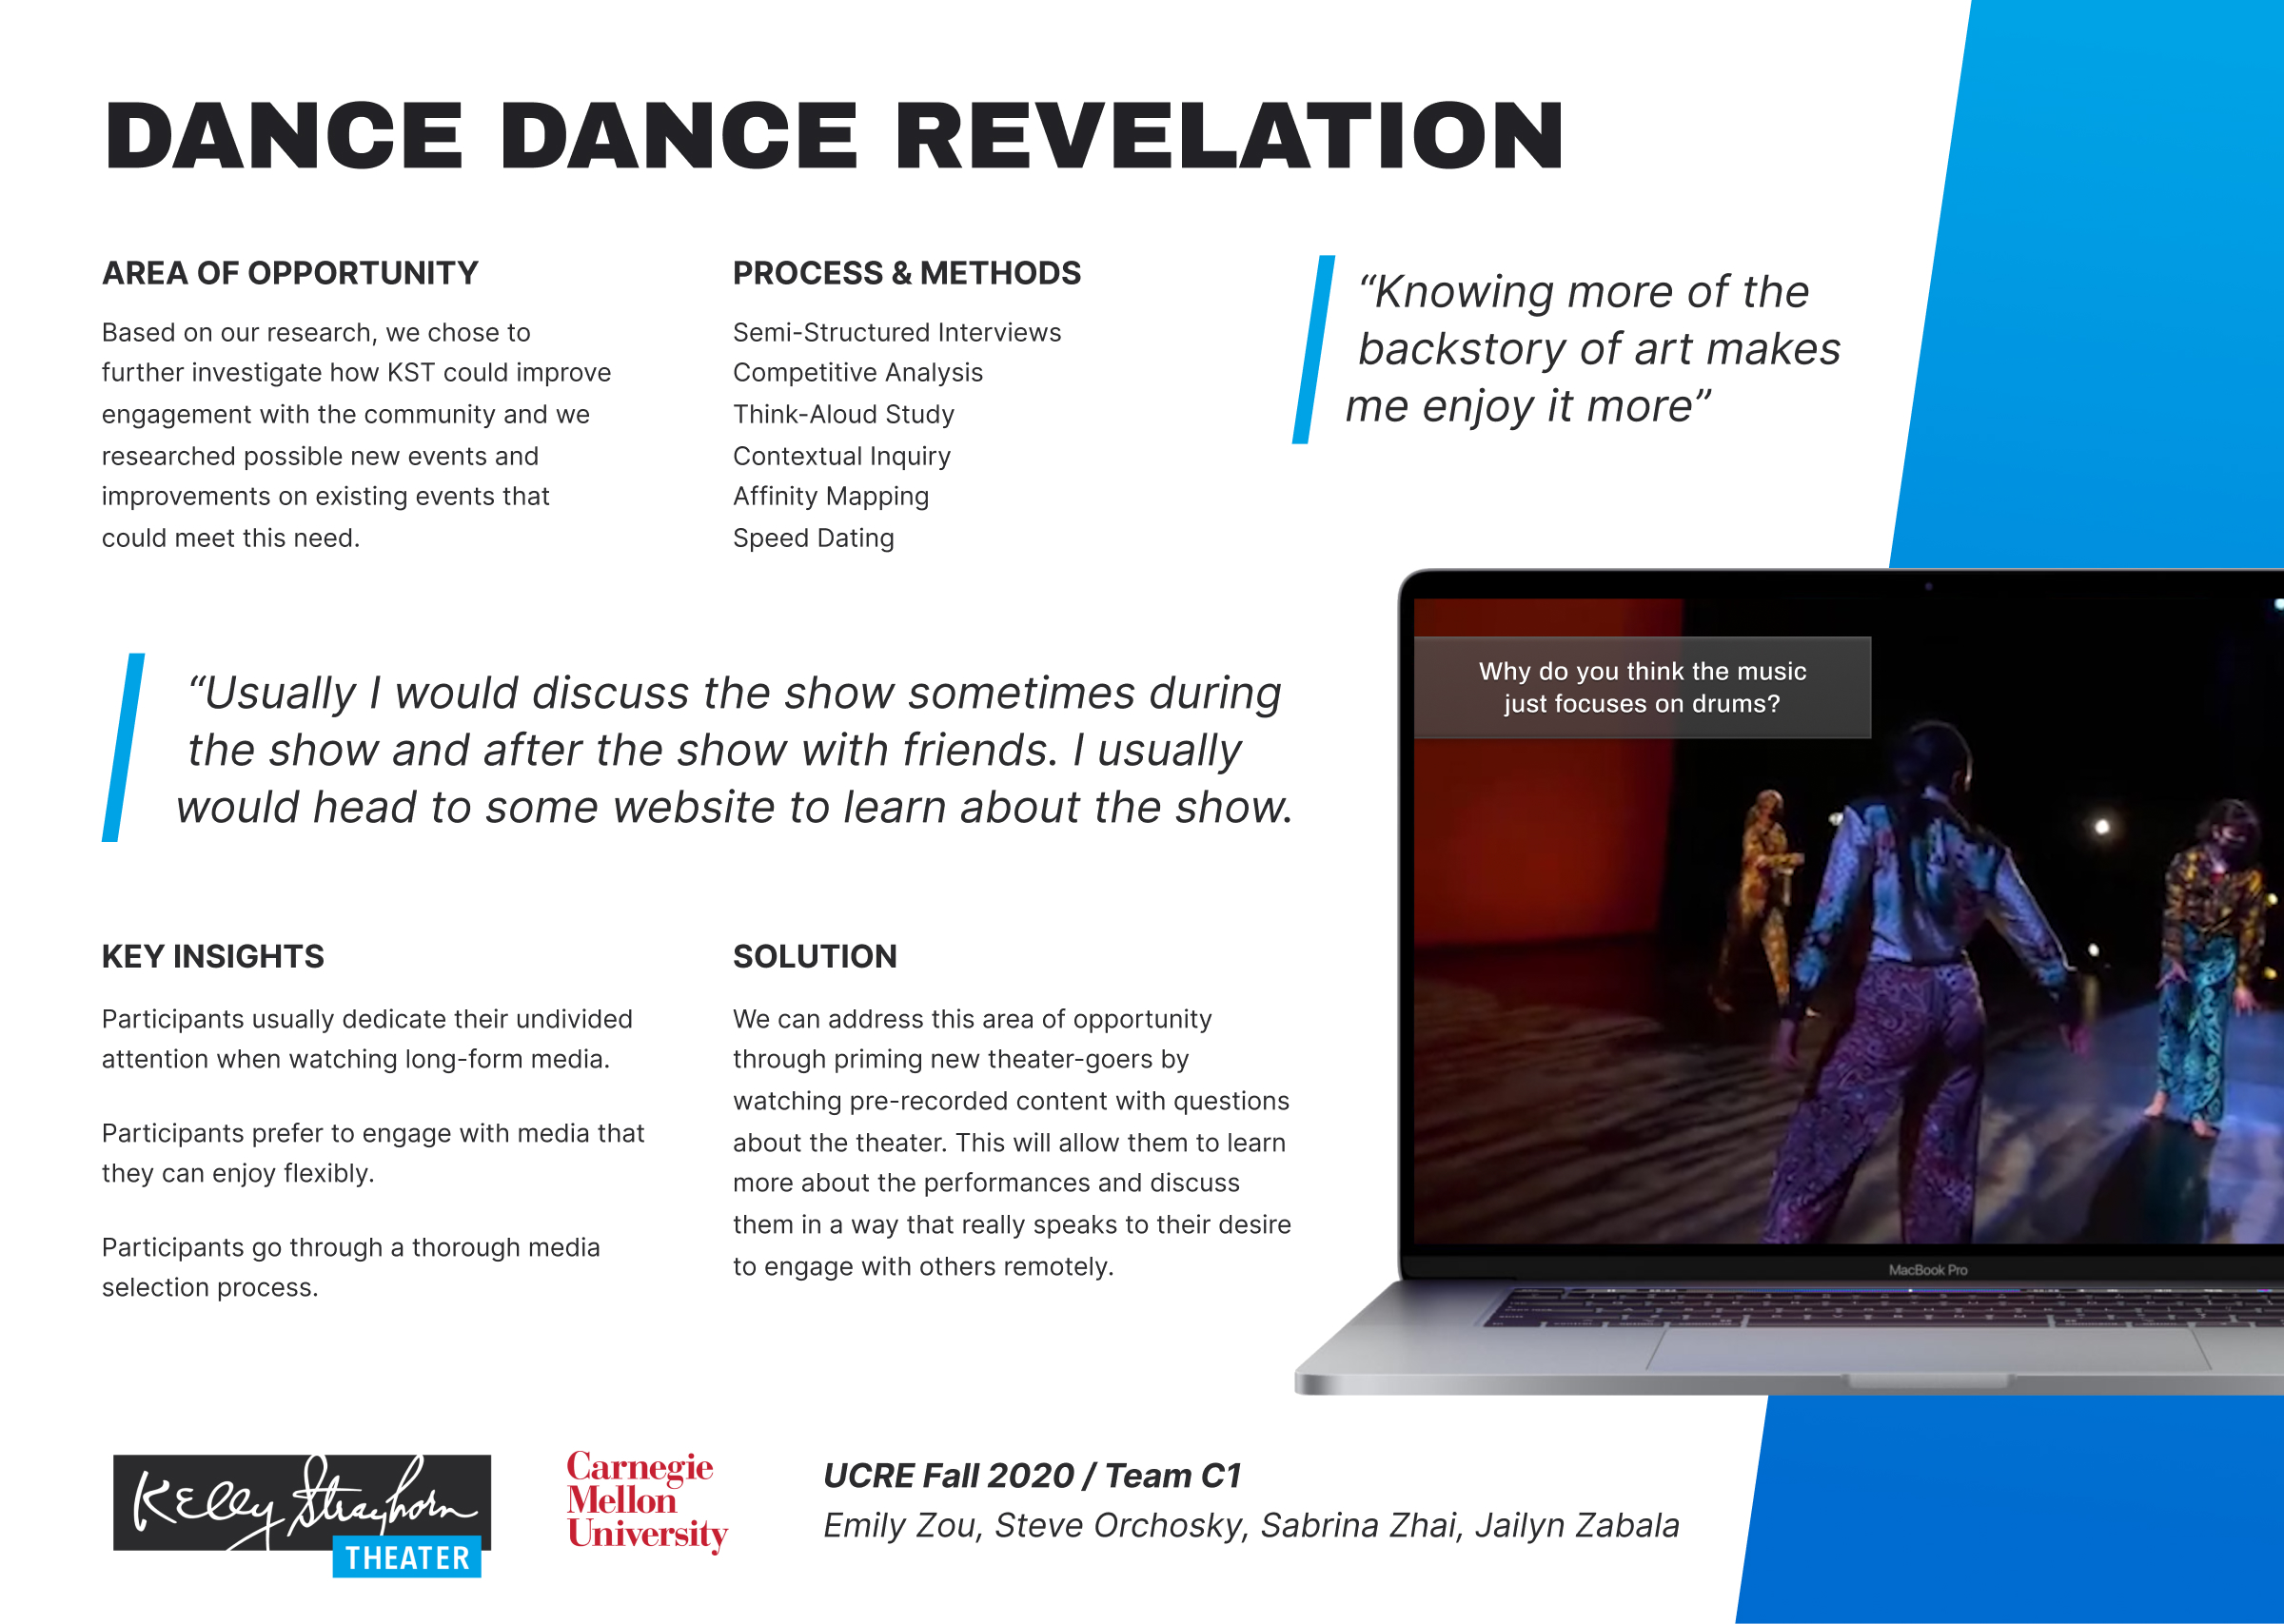 Dance Dance Revelation poster describing our solution and research